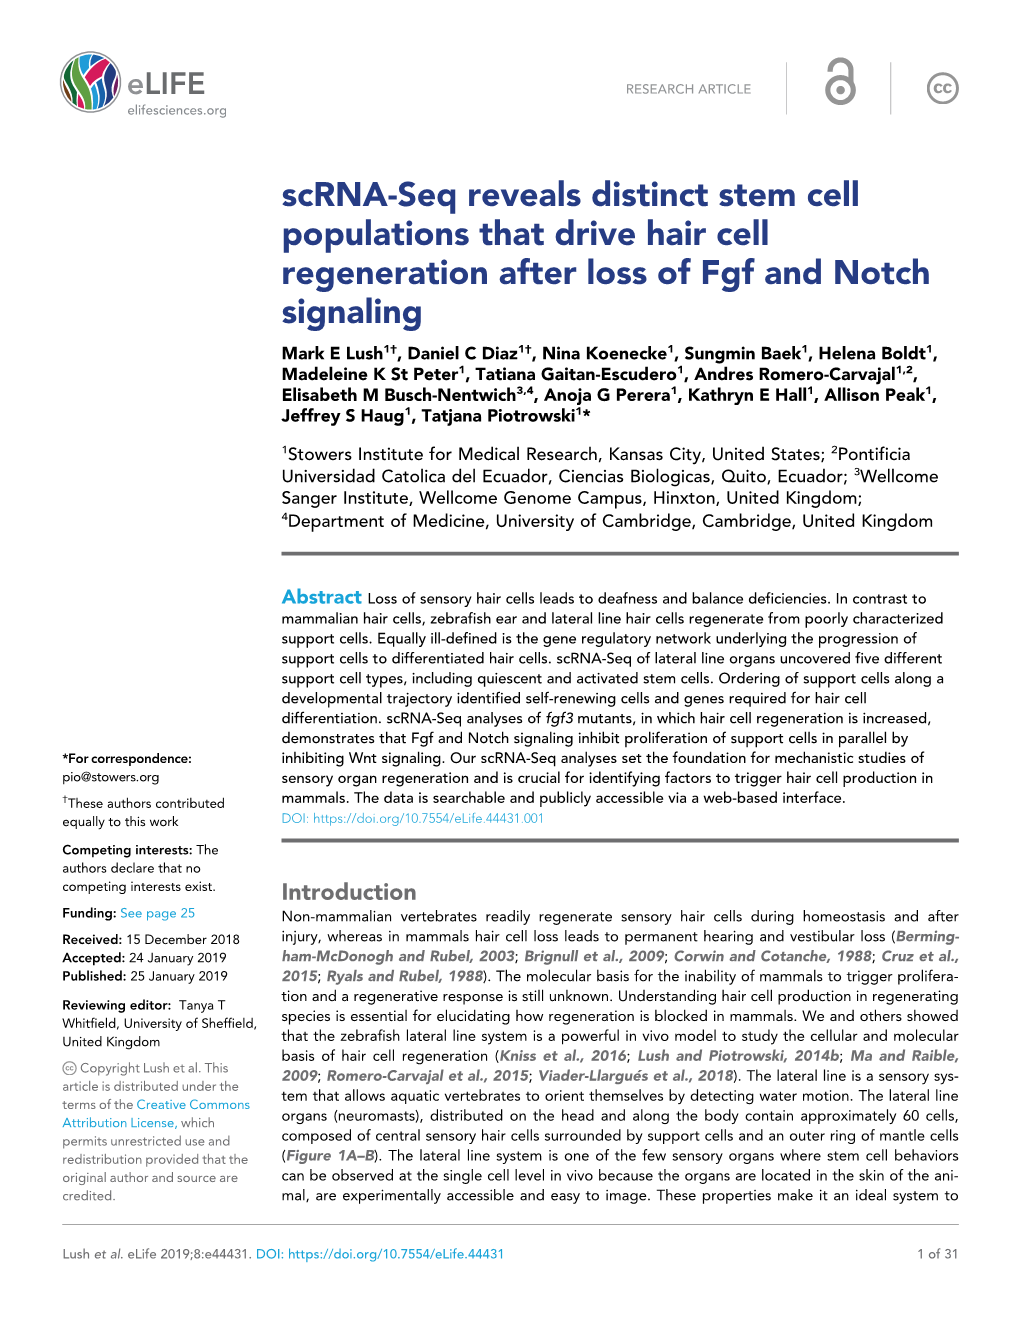 Scrna-Seq Reveals Distinct Stem Cell Populations That Drive Hair Cell Regeneration After Loss of Fgf and Notch Signaling